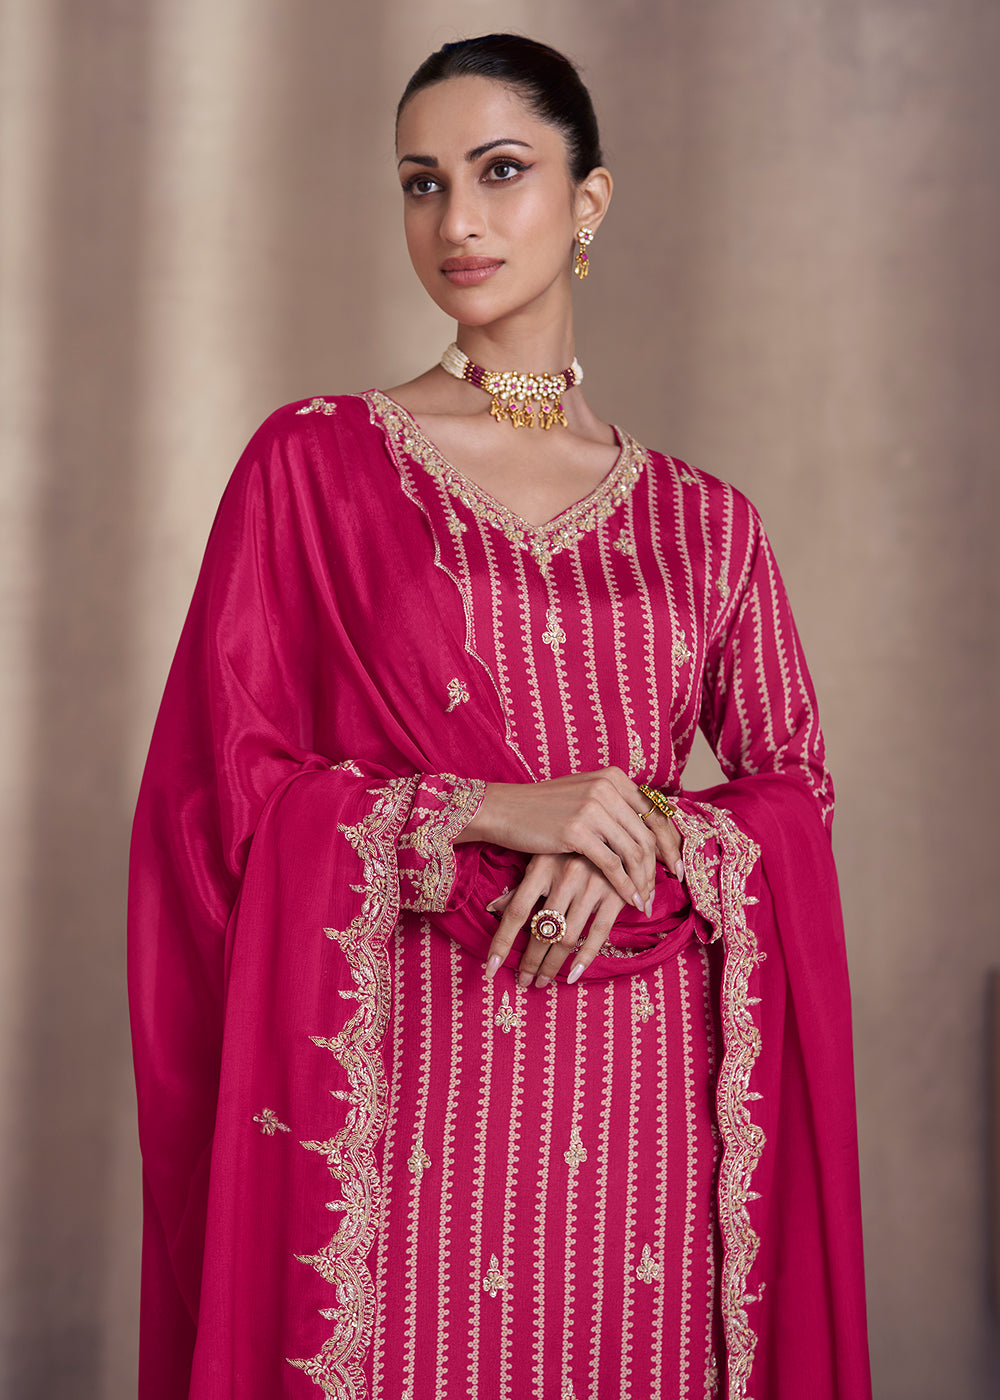 Shop Now Rani Pink Embroidered Chinnon Silk Designer Sharara Suit Online at Empress Clothing in USA, UK, Canada, Italy & Worldwide.